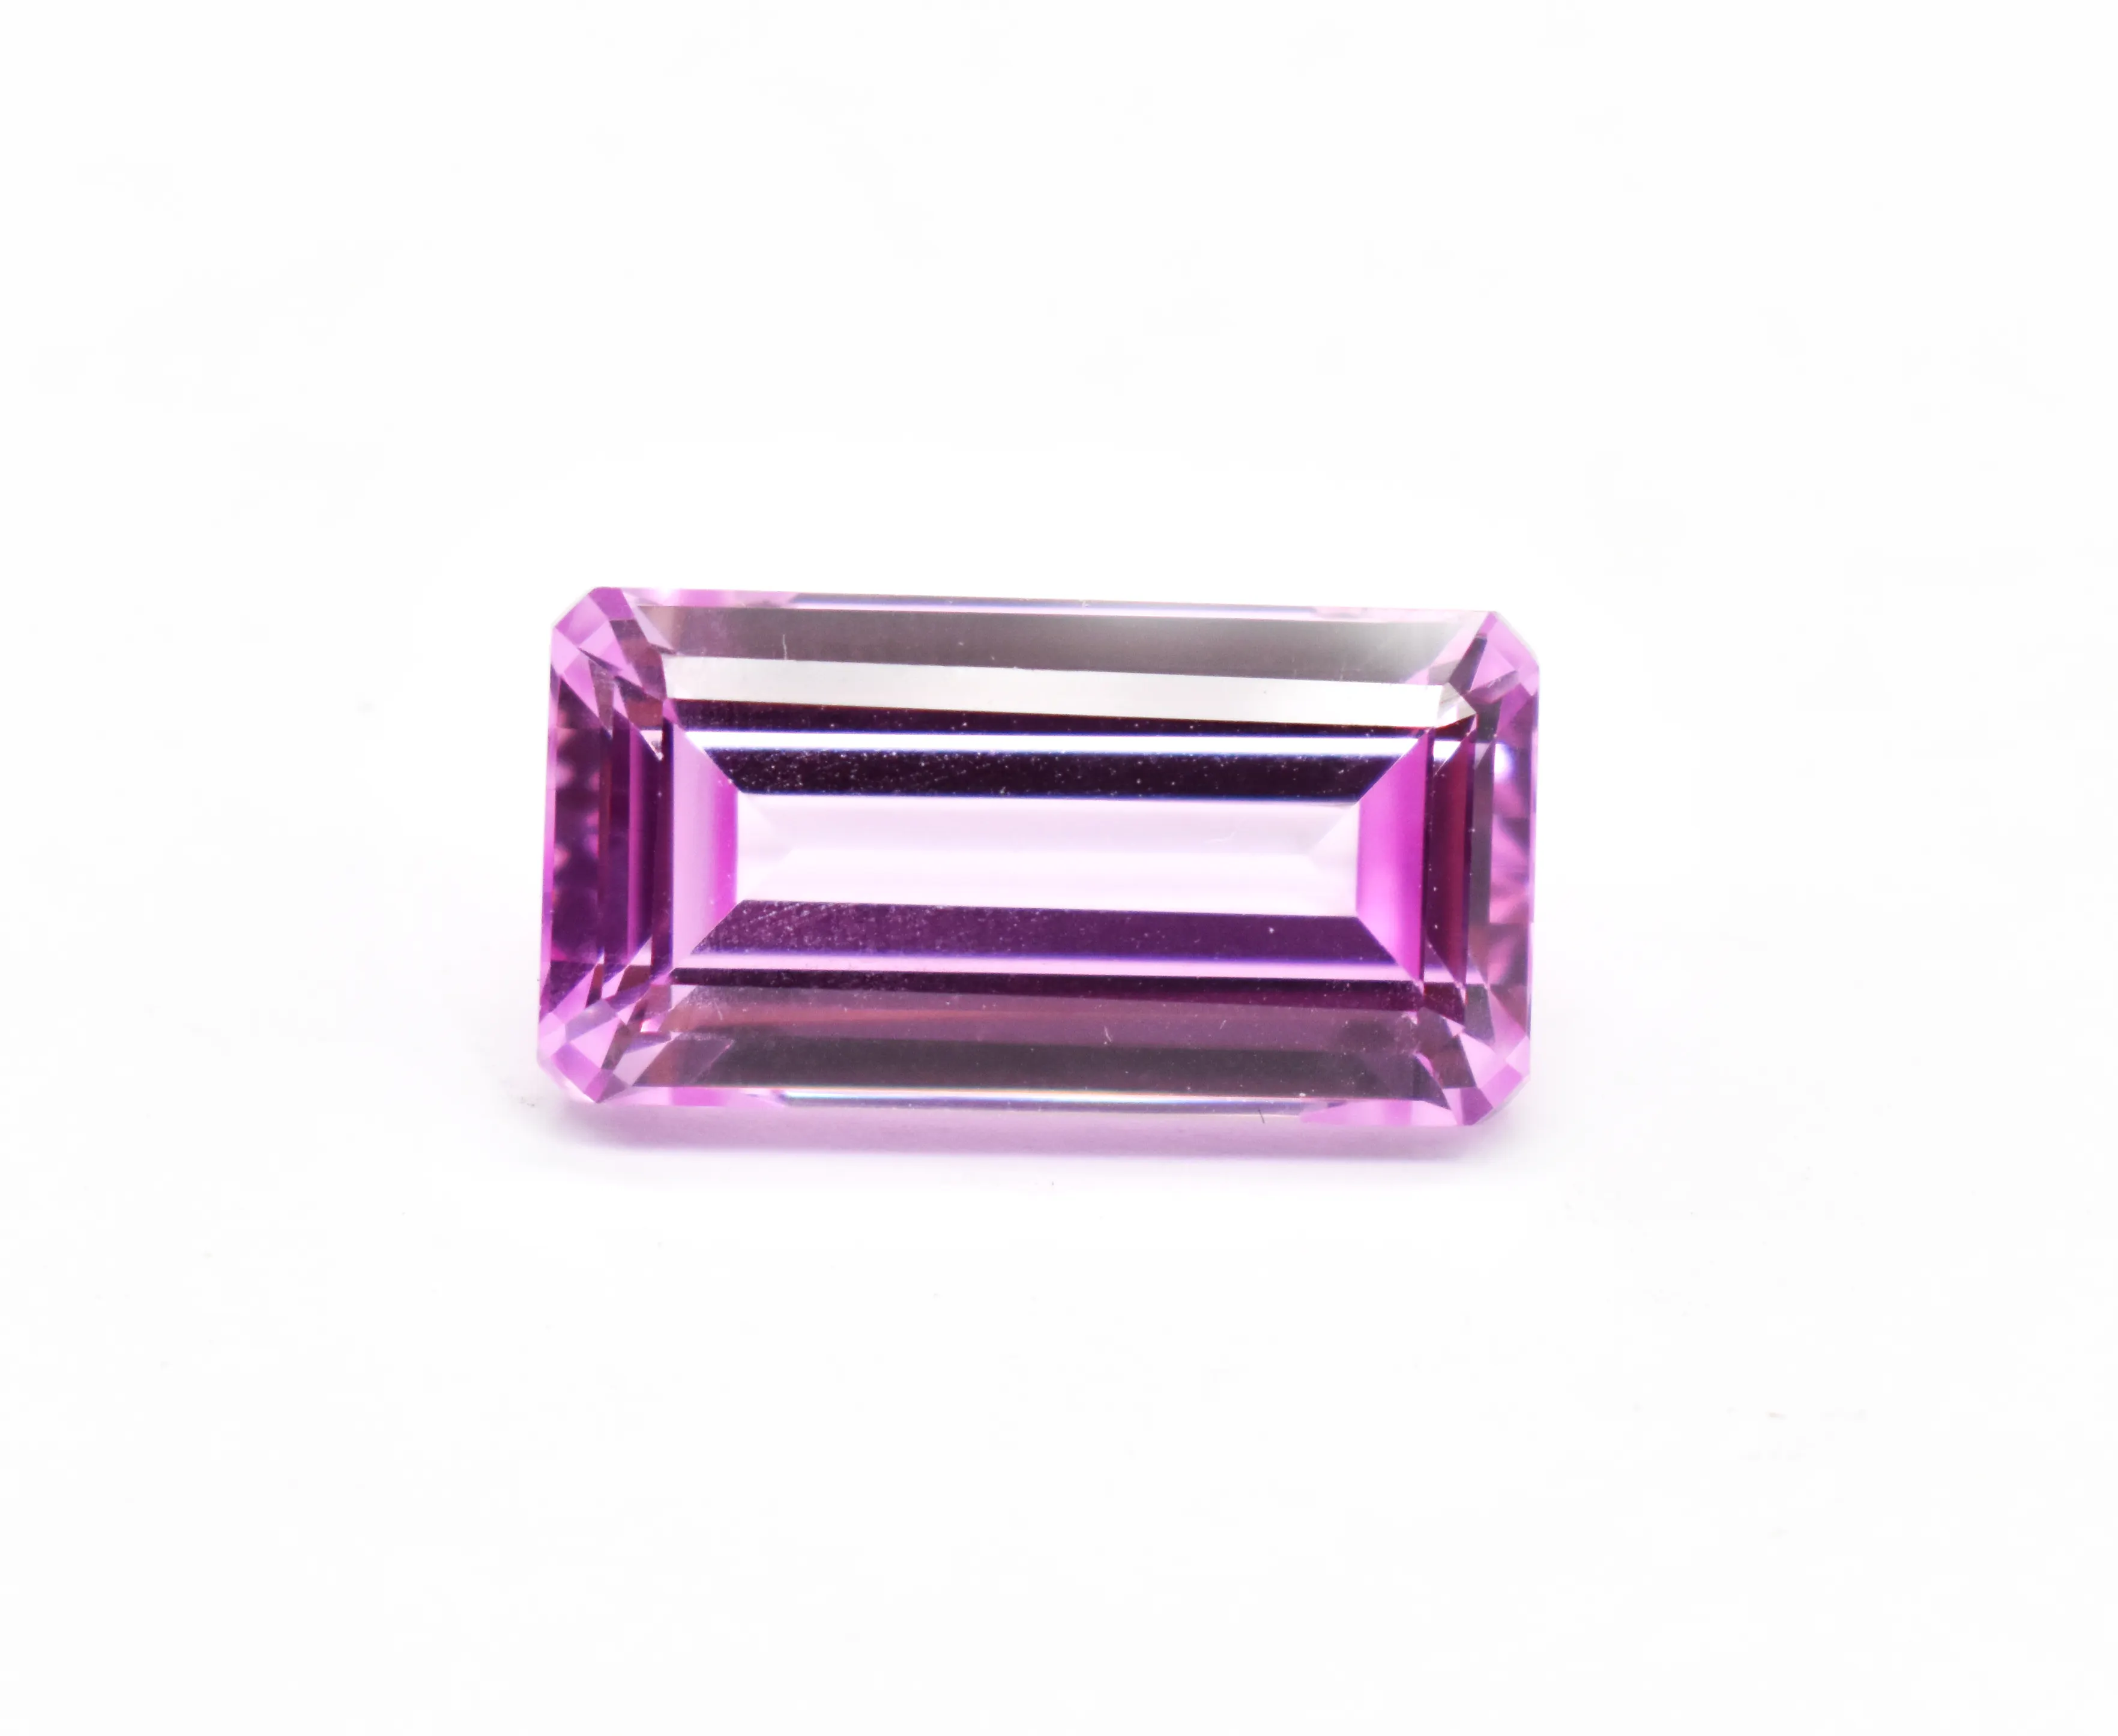 Lab Grown Pink Sapphire Long Octagon Faceted Loose Gemstone All Calibrated Size Available Emerald Cut Pink Sapphire